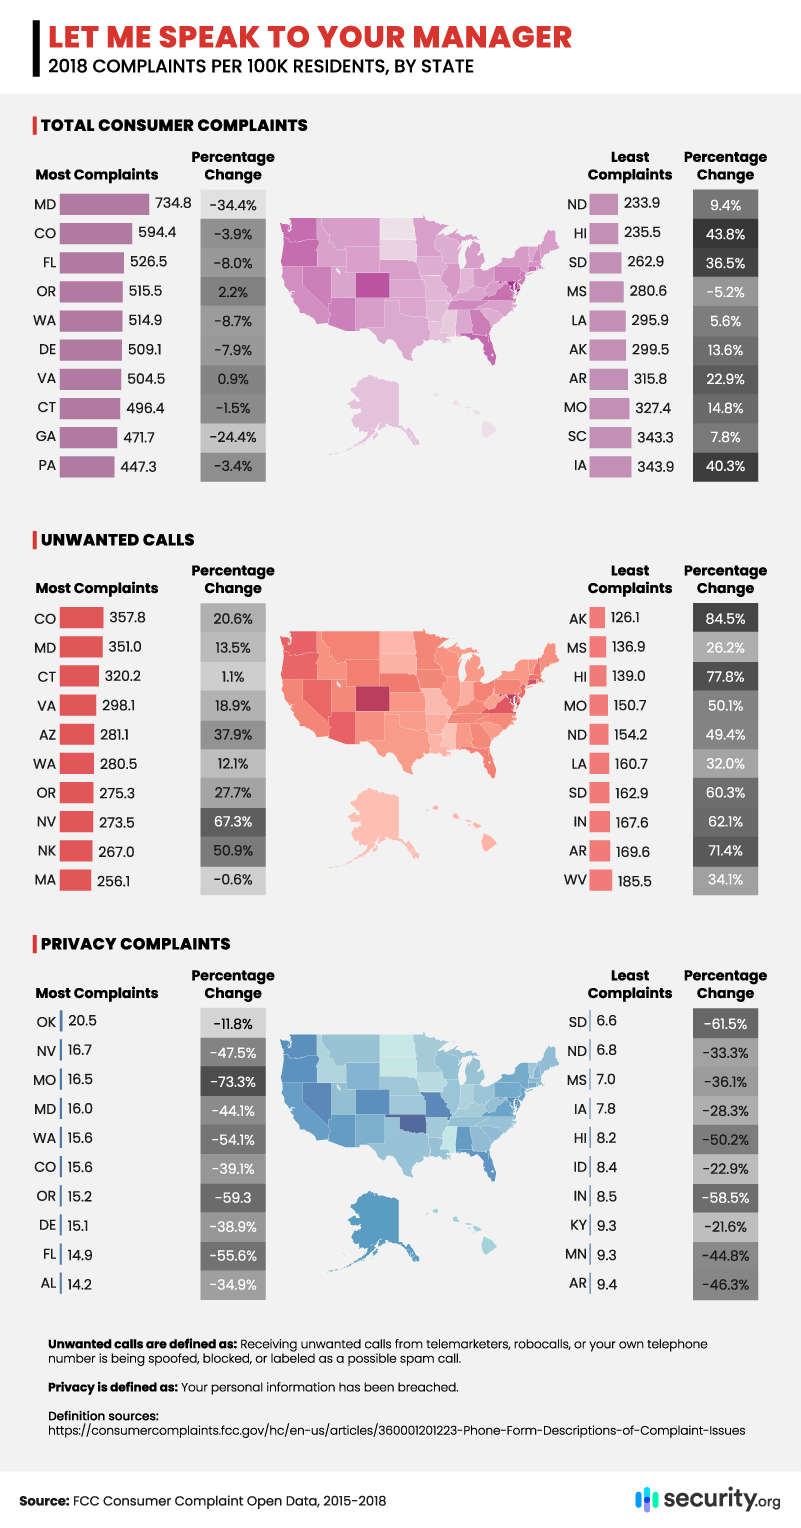 Let Me Speak to Your Manager: 2018 Complaints per 100K Residents, by State